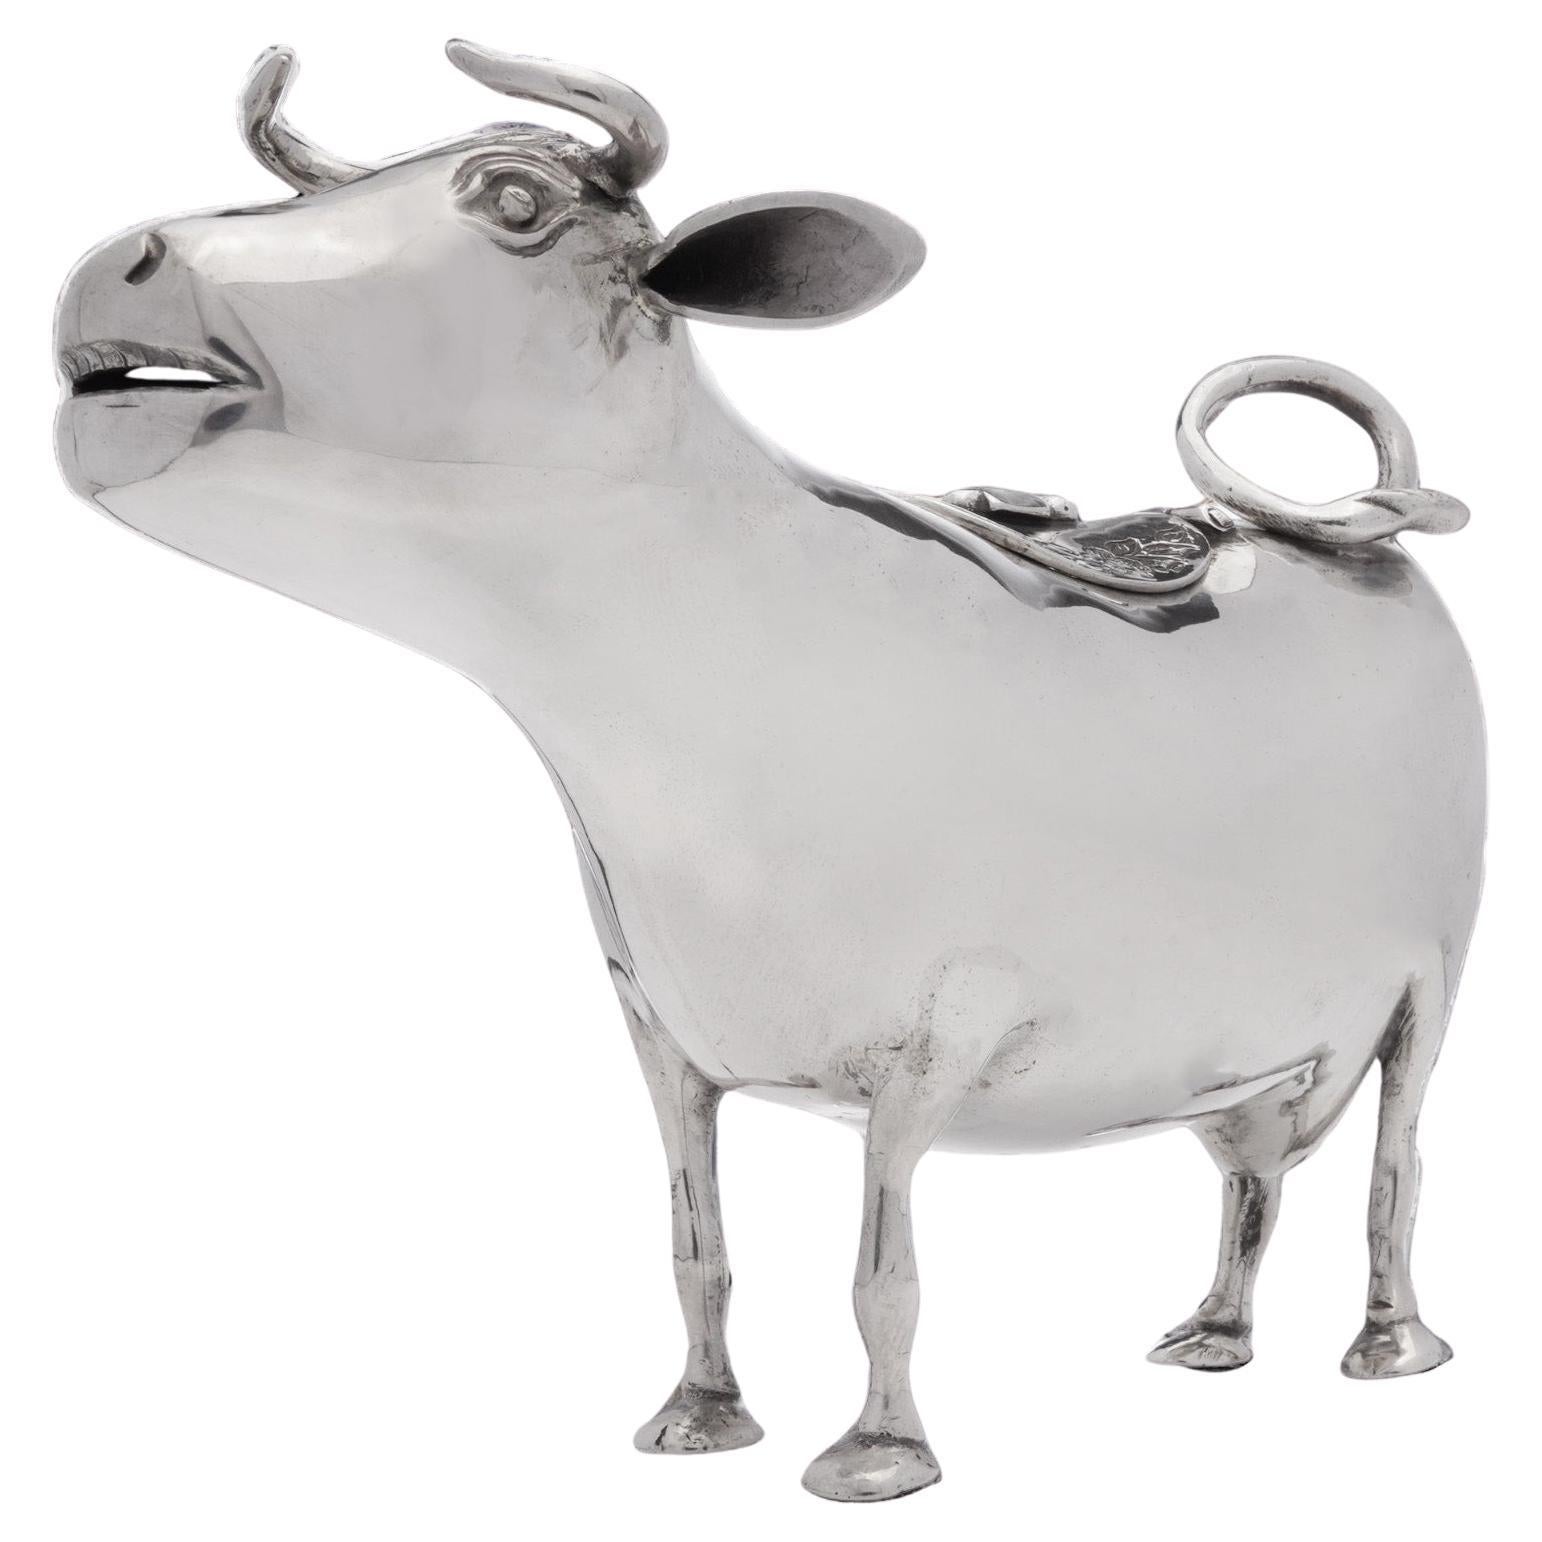 Antique Dutch Cow Shaped Creamer - Early 20th Century For Sale